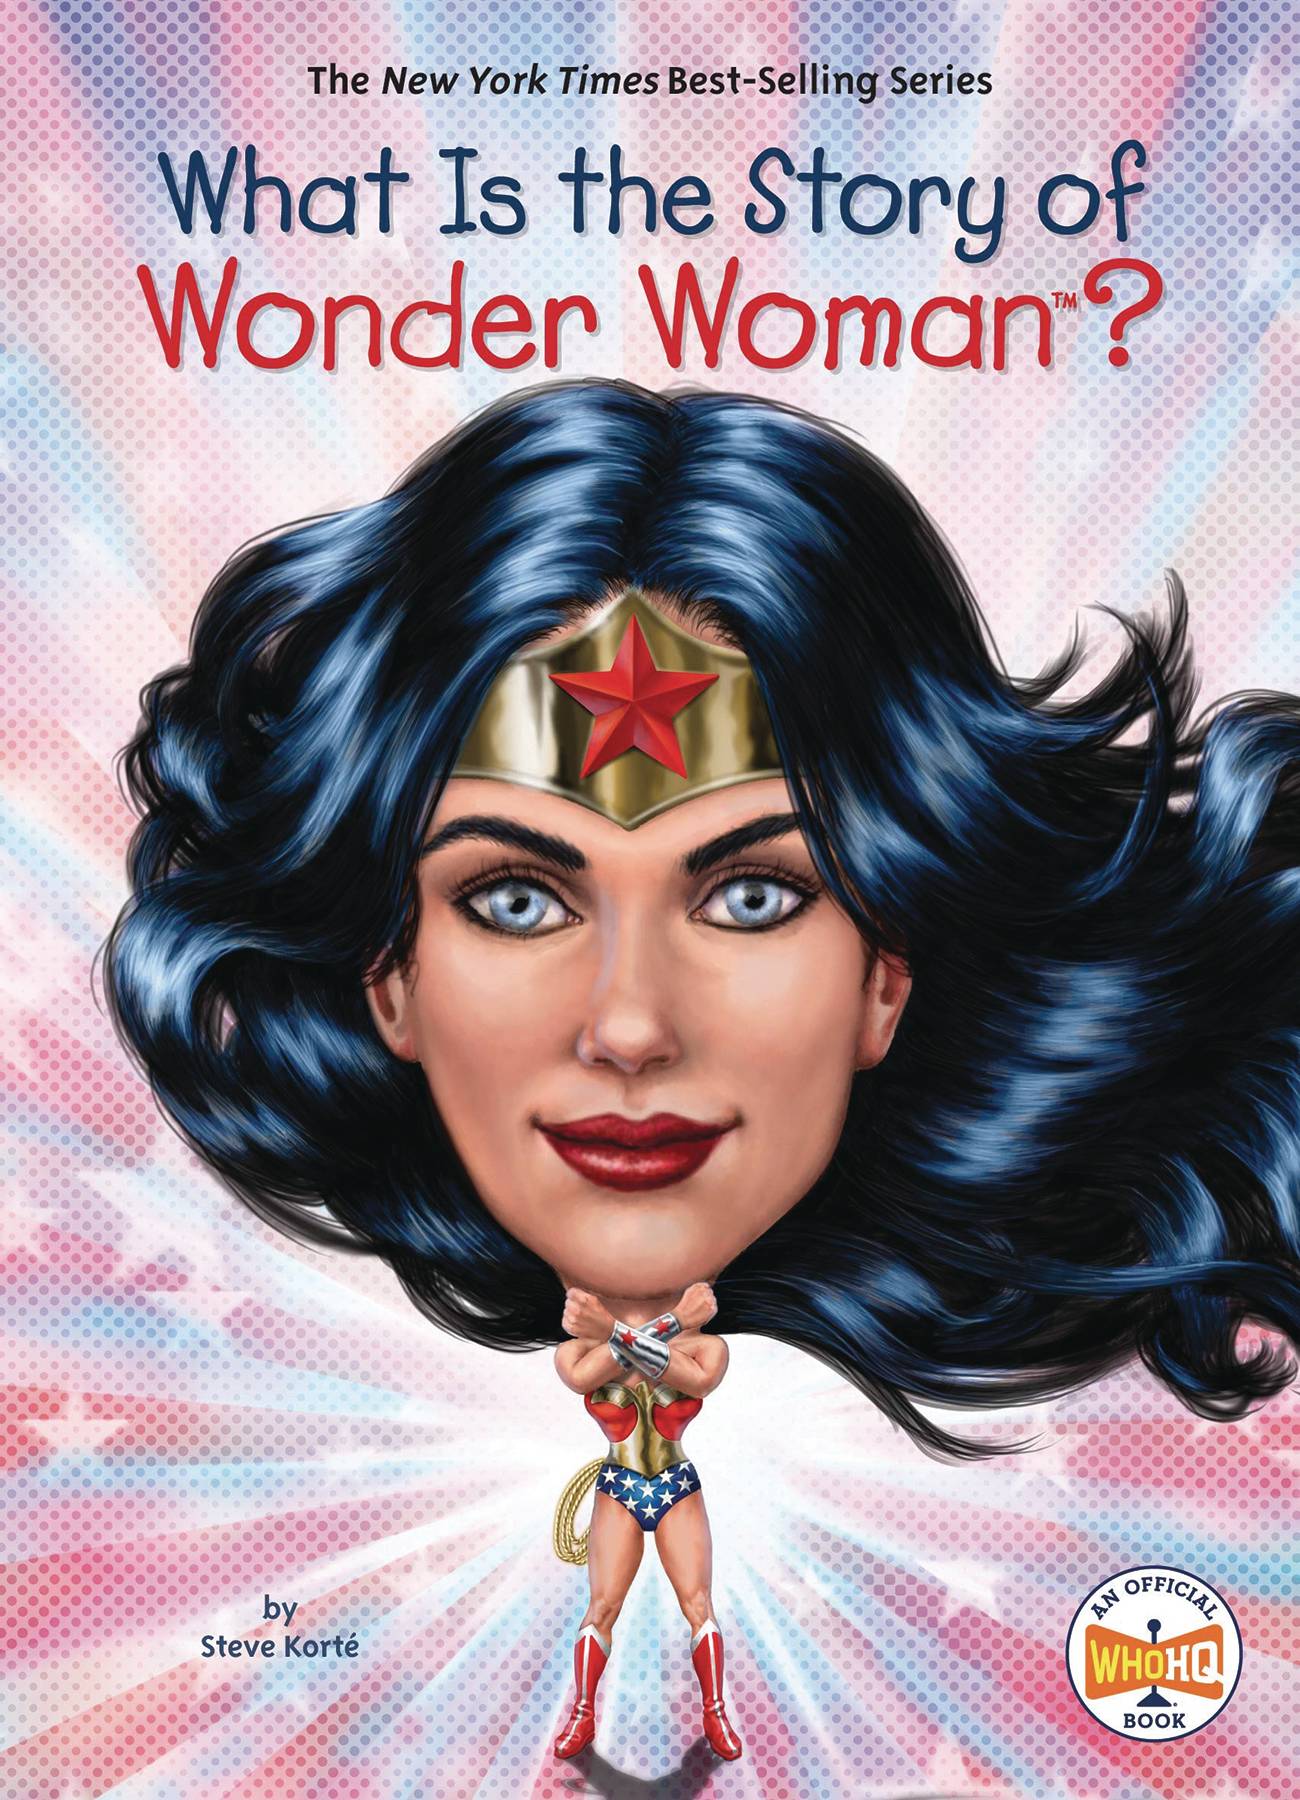 What Is the Story of Soft Cover Volume 1 Wonder Woman 